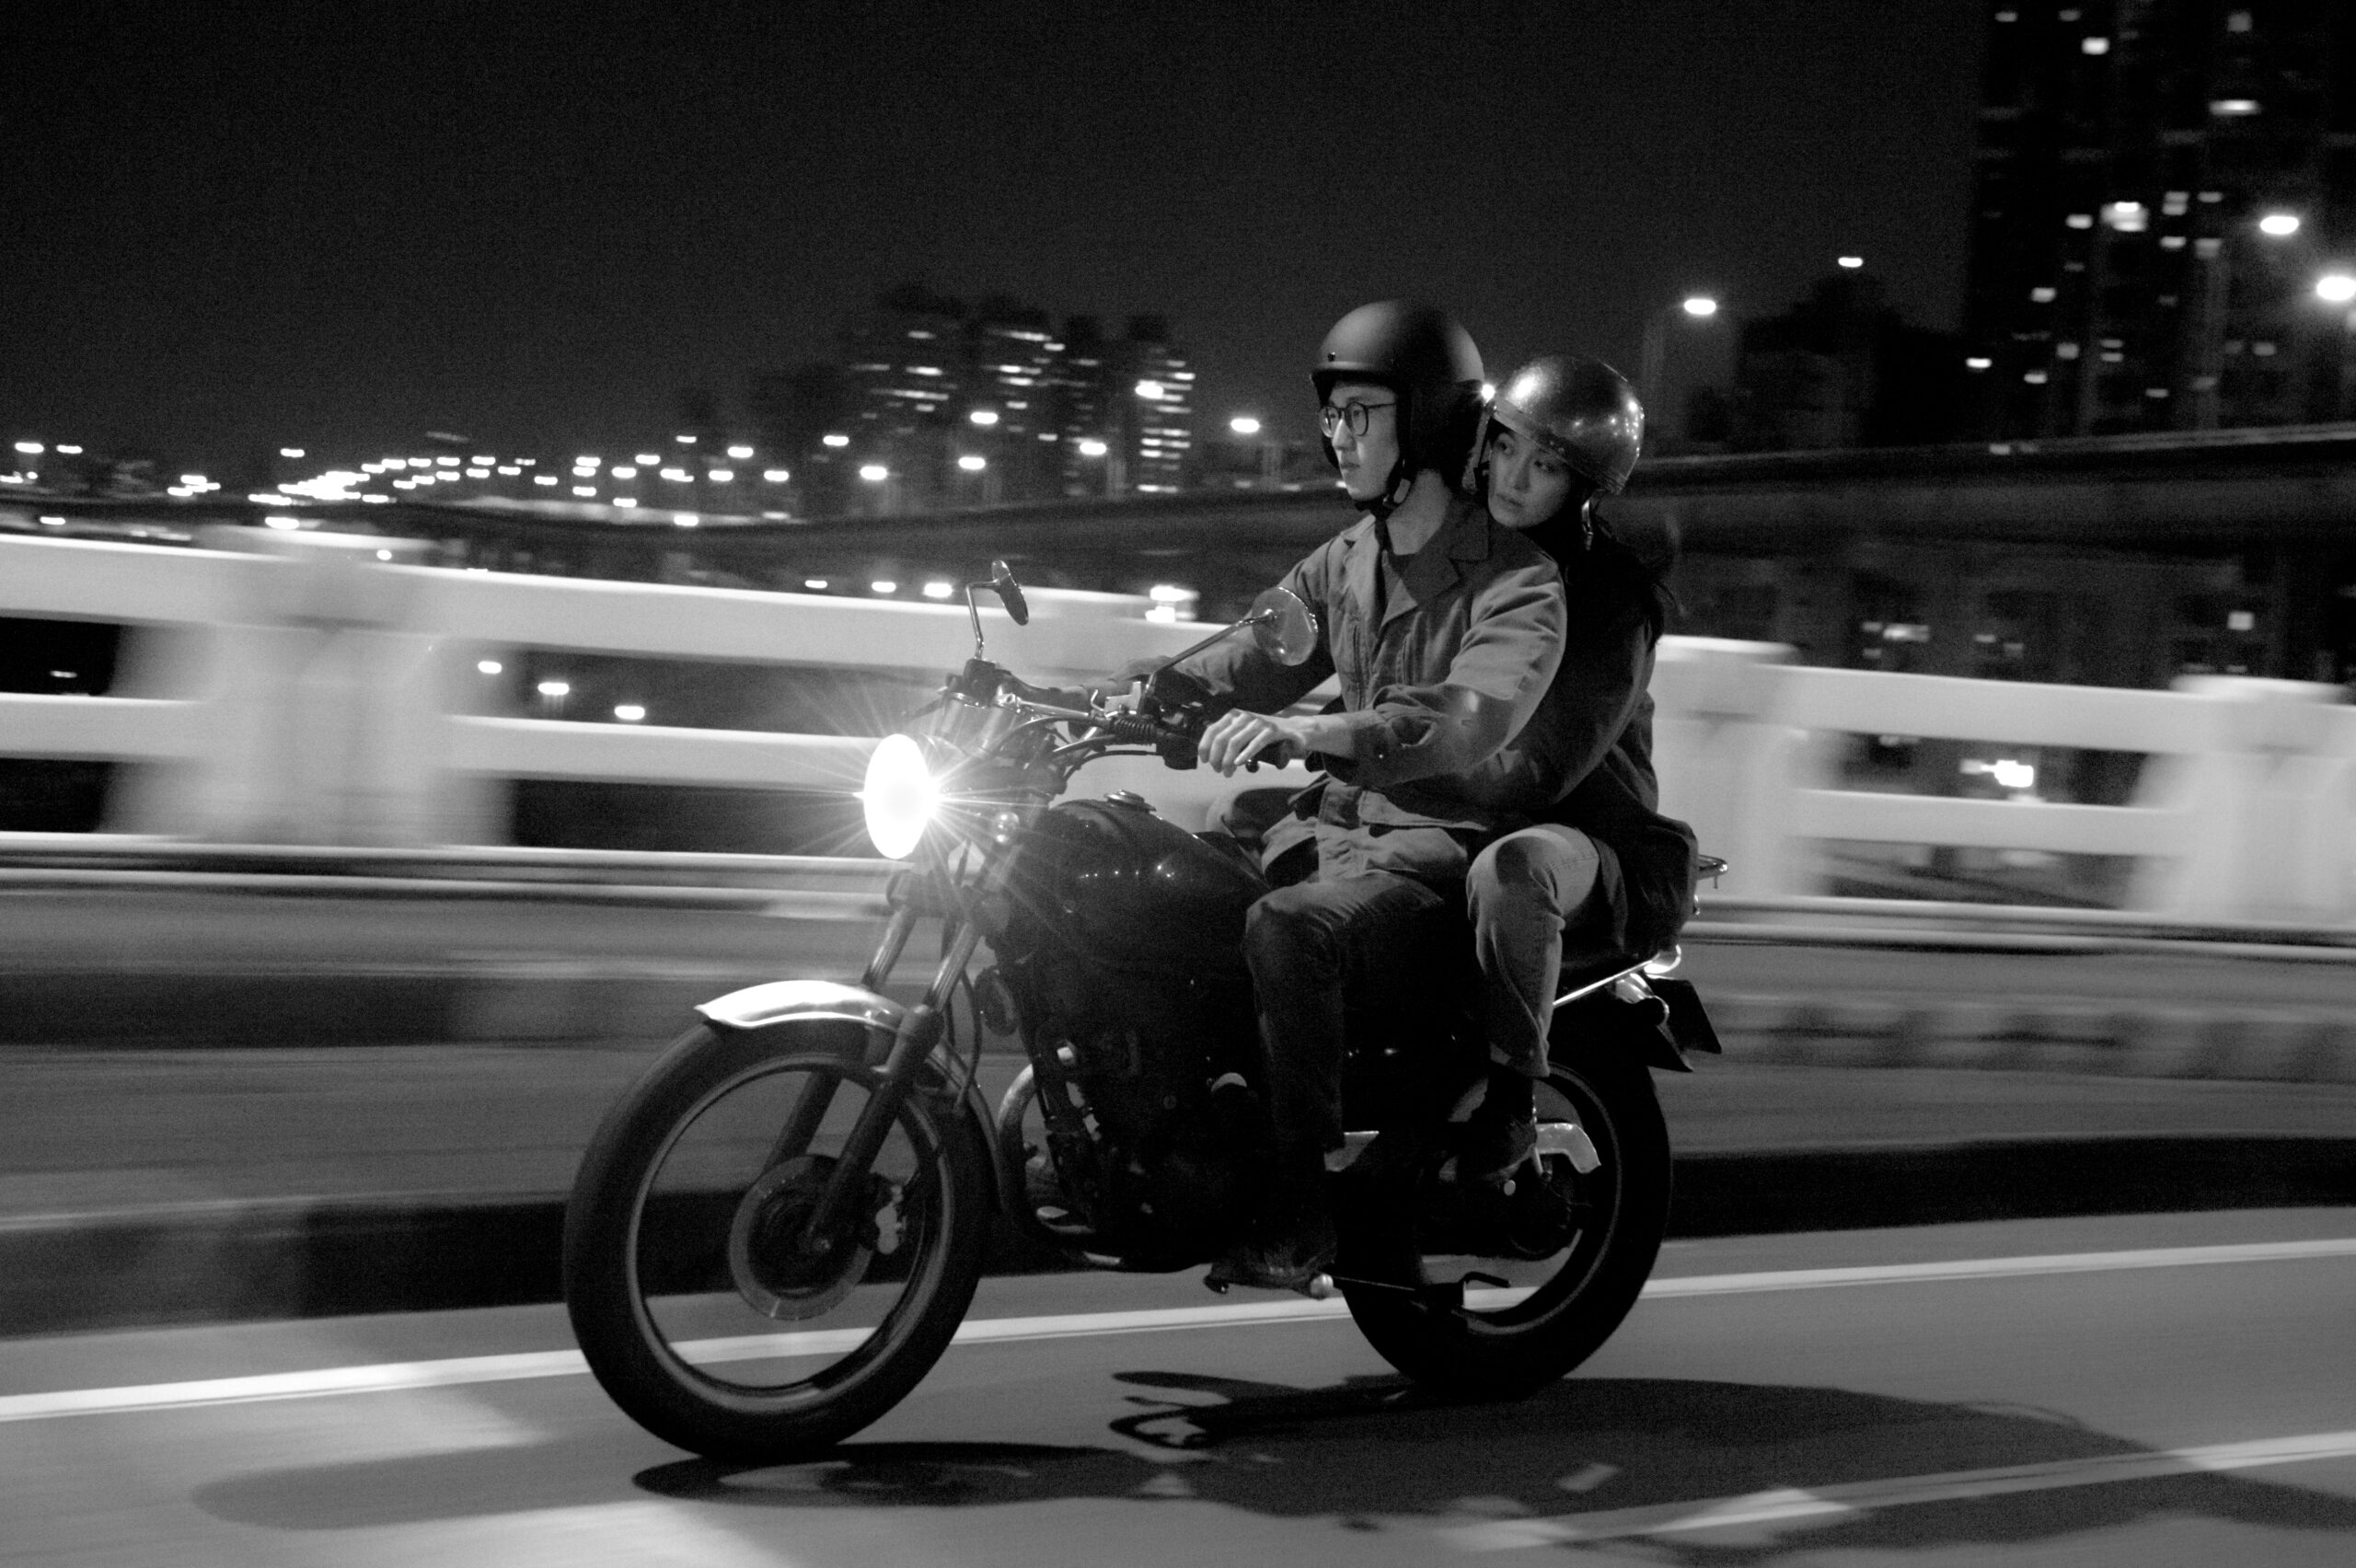 A black and white still from the film 'Far Away Eyes' by the director Wang Chung-Hong. In this image, we see a Taiwanese man in his late 20's driving a motorcycle at night-time, with a young woman of a similar age as his passenger holding onto him from behind. The man wears glasses, and they are both wearing dark jackets, trousers, and helmets. The cityscape in the background is blurry, creating a sense of motion.